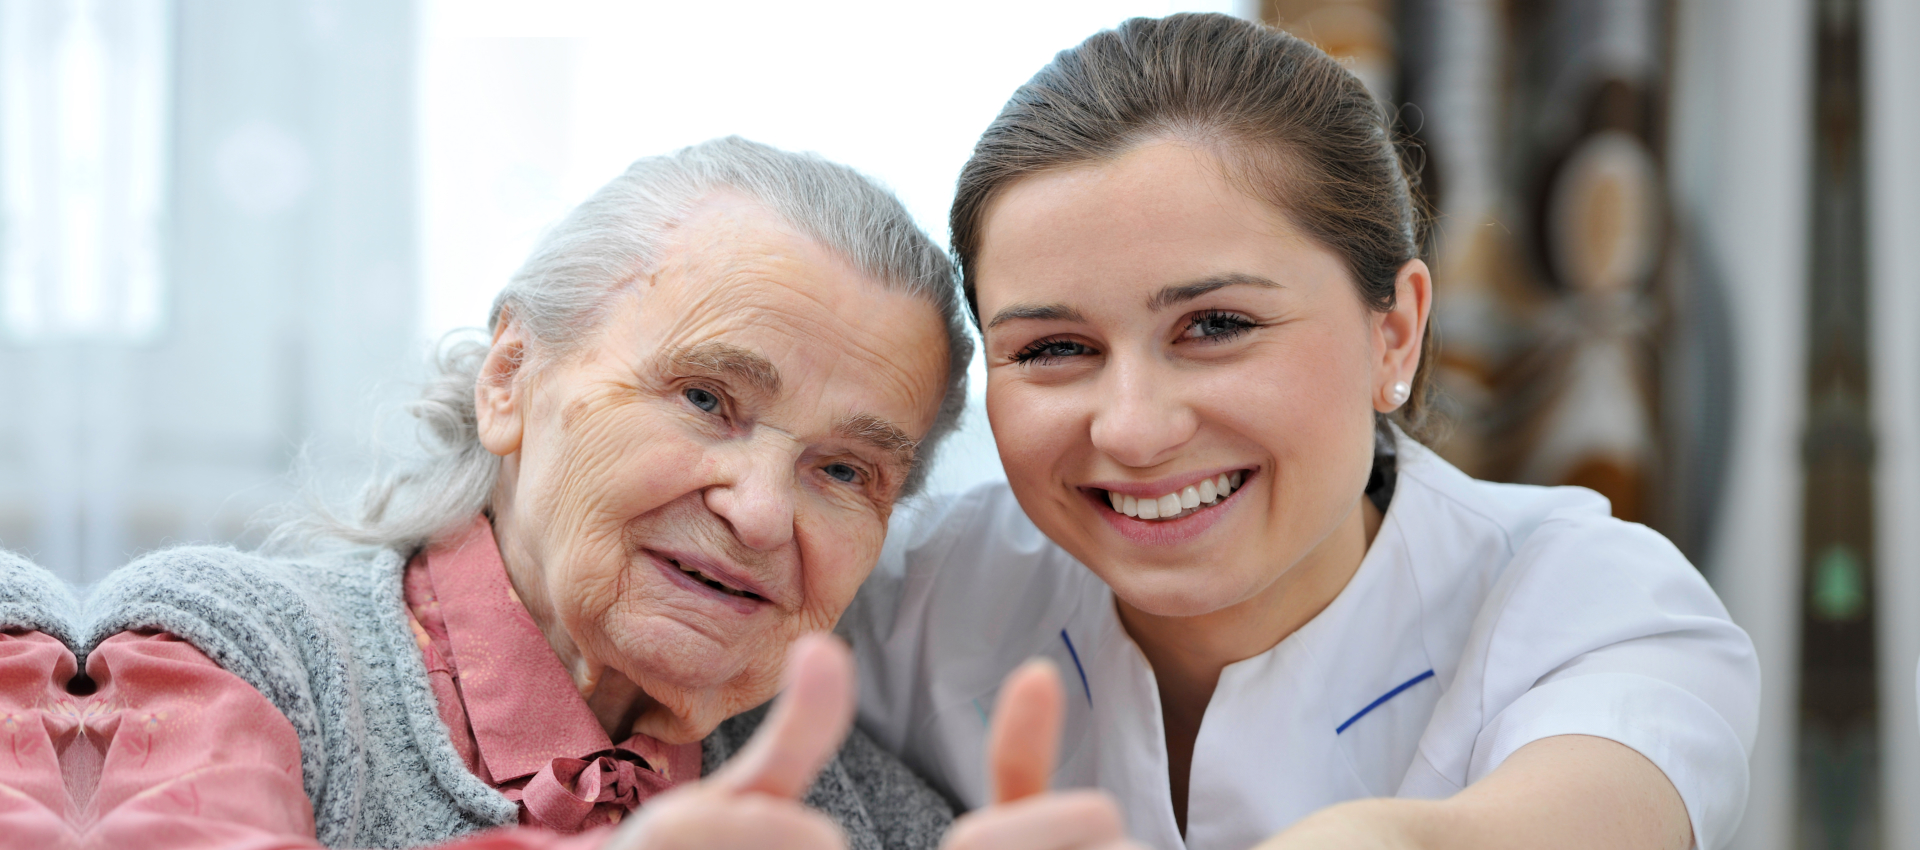 senior woman and young woman smiling while thumbs up